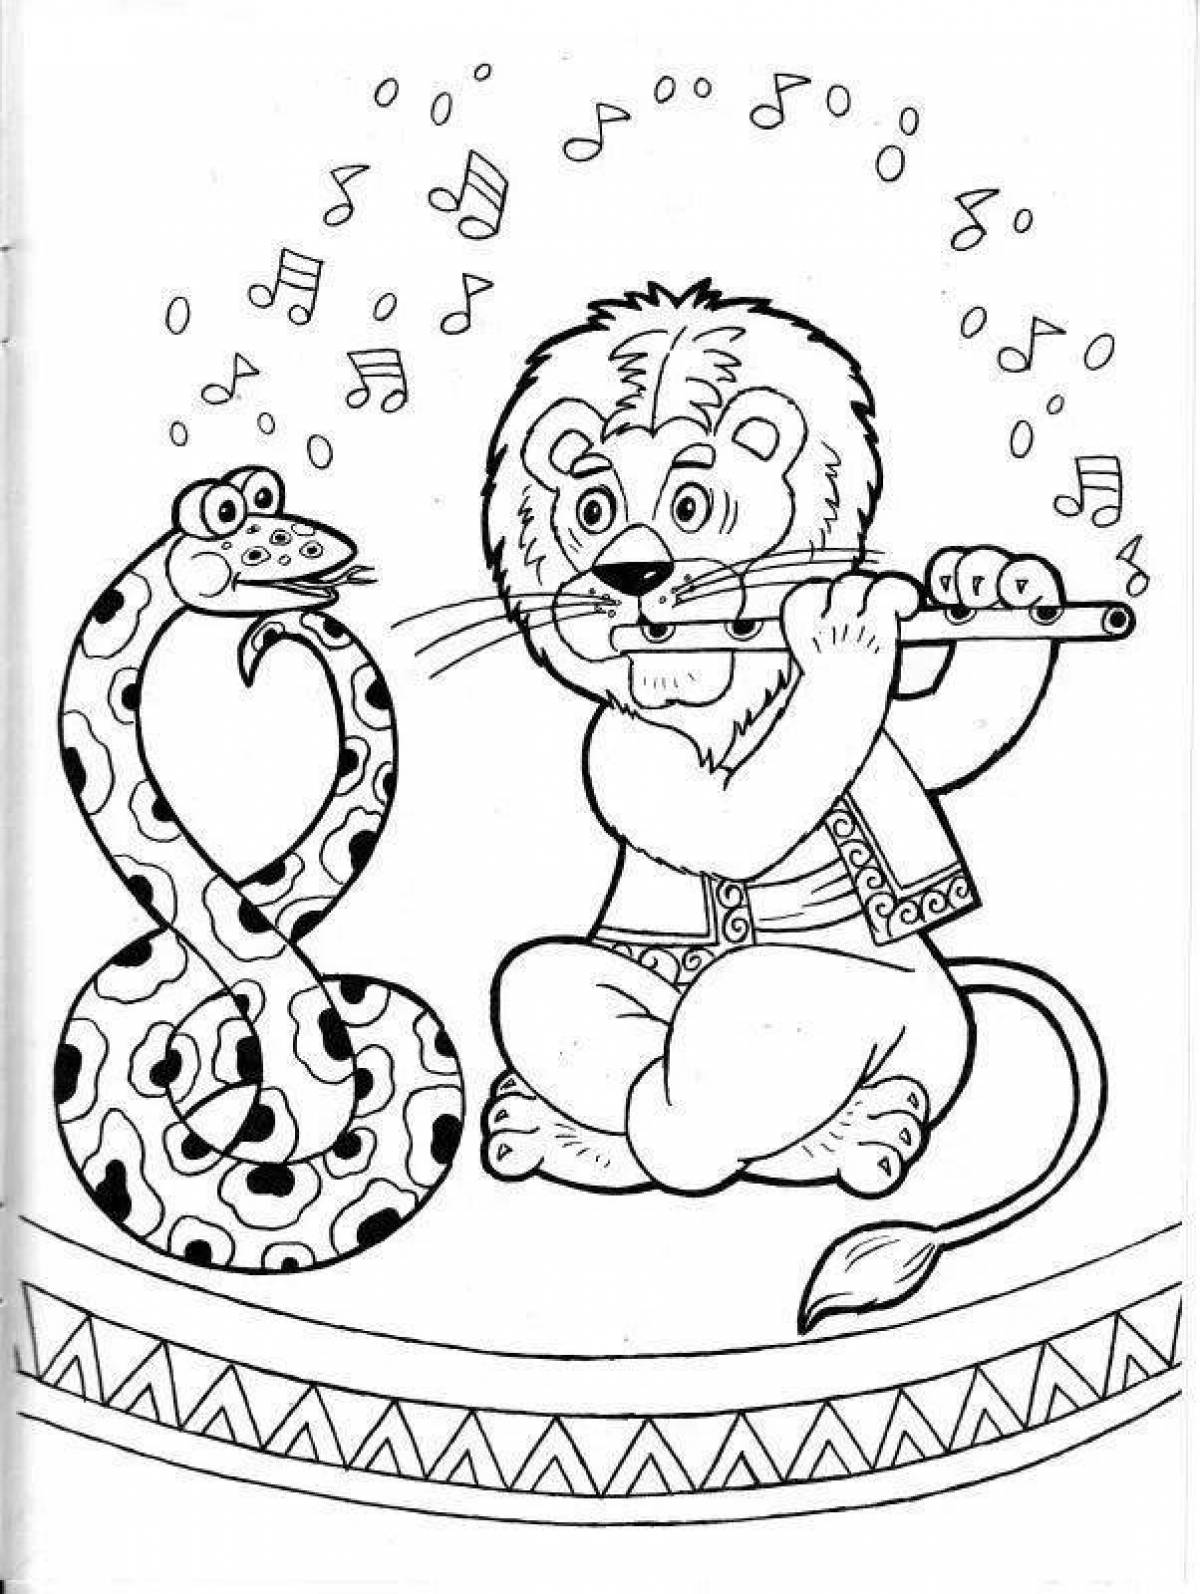 A fun circus coloring book for kids 6-7 years old